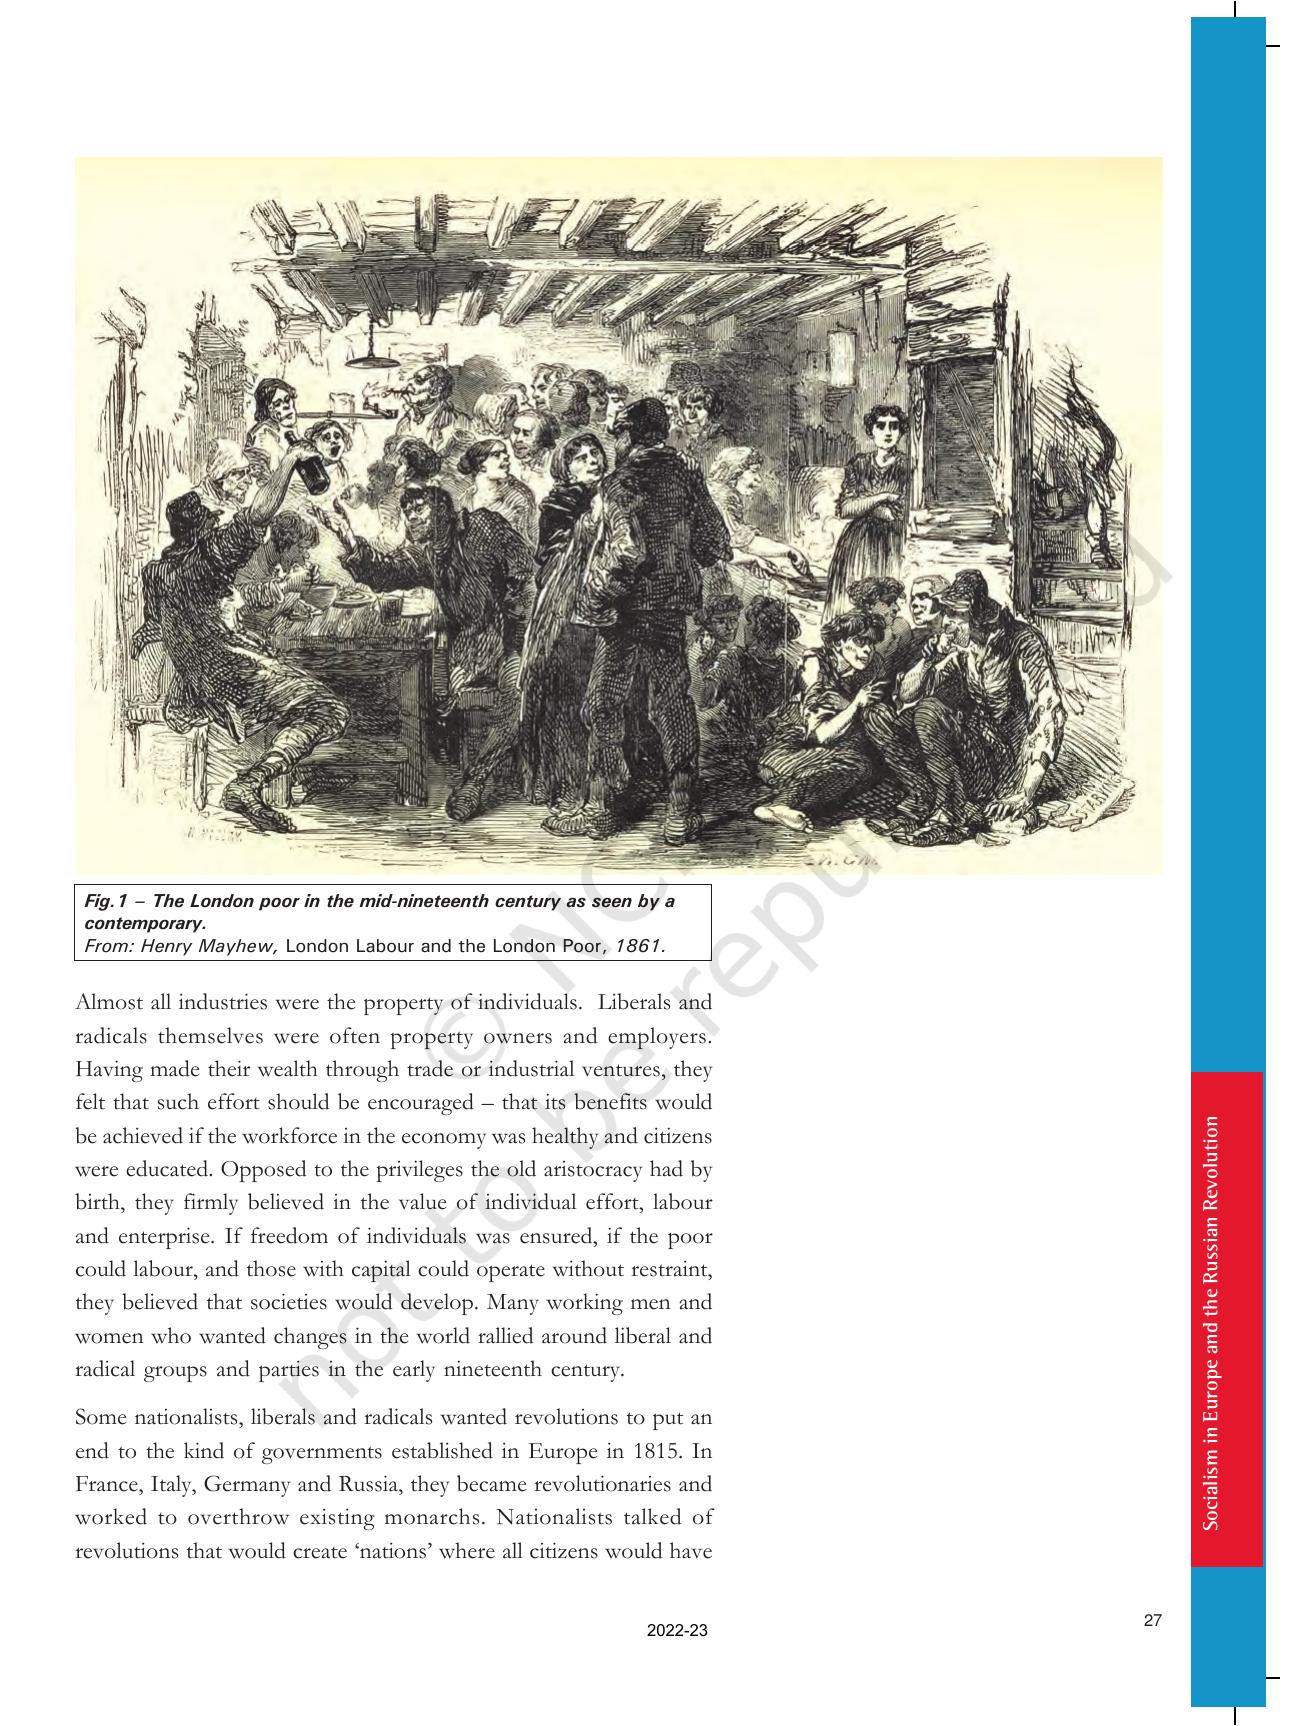 NCERT Book for Class 9 History Chapter 2 Socialism in Europe and the Russian Revolution - Page 3